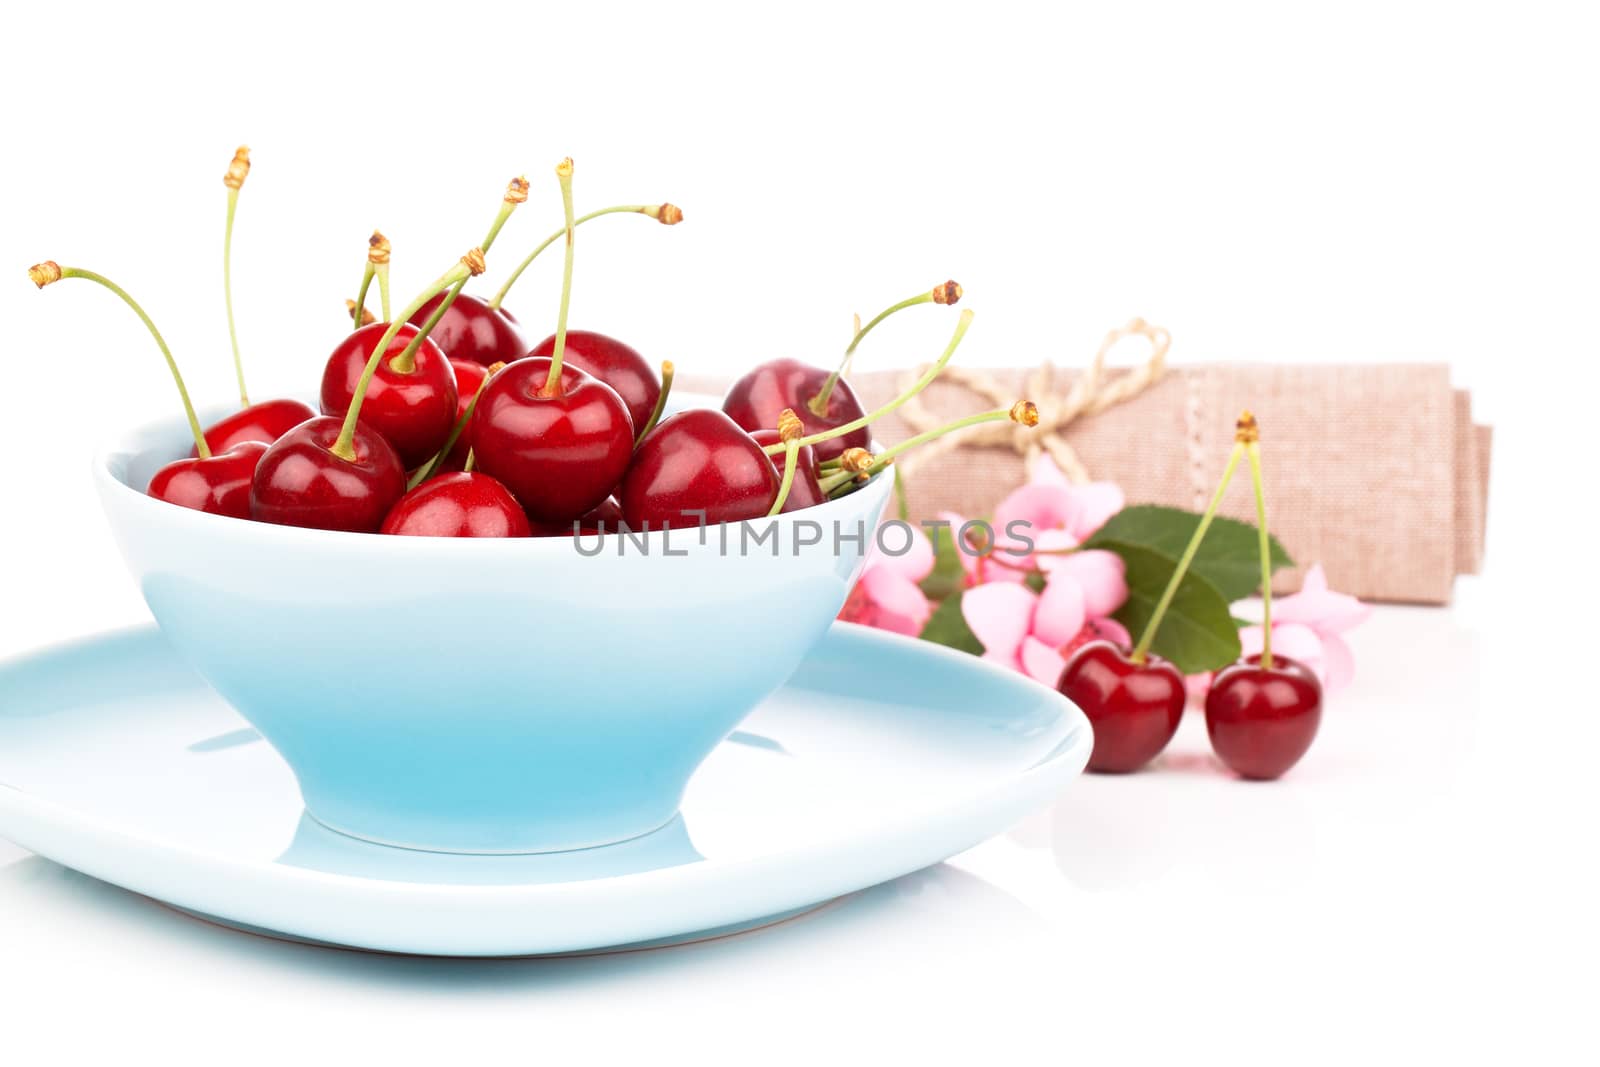 Bowl full of cherries isolated on white background